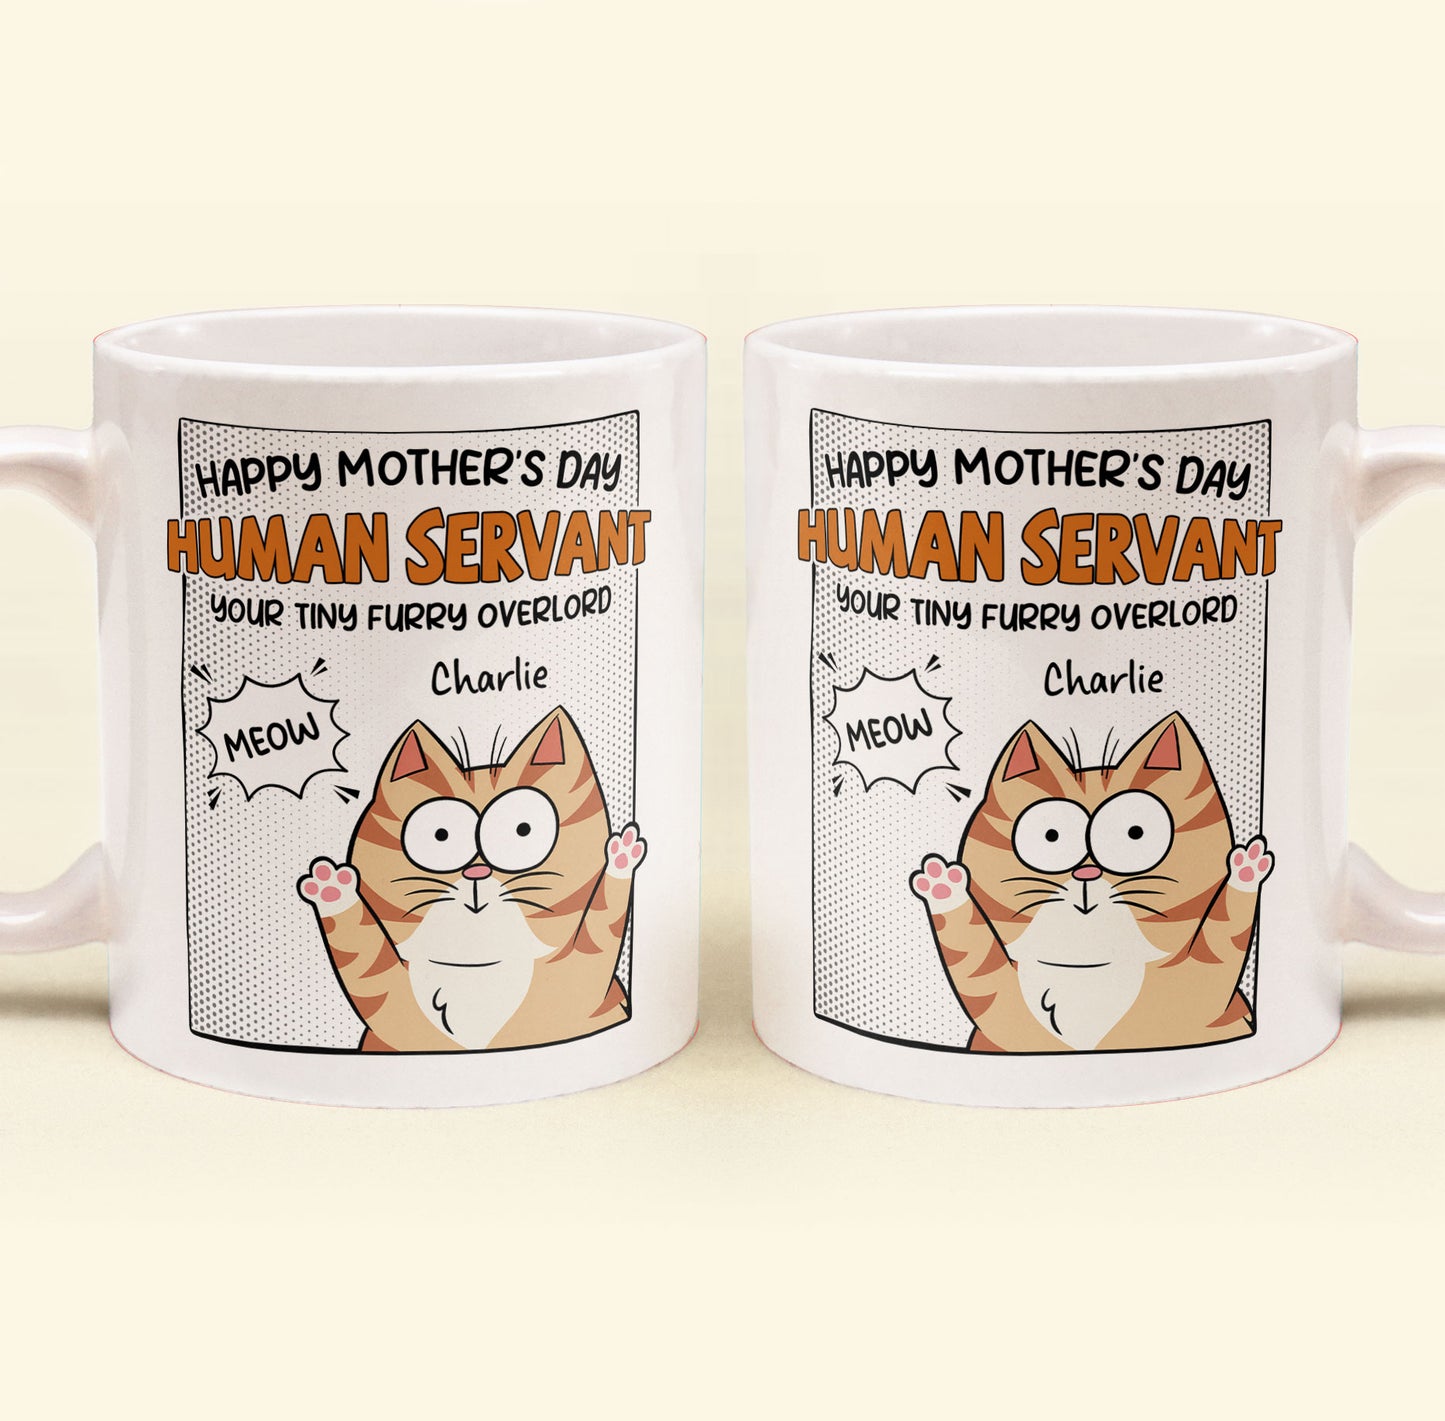 Happy Mother's Day - Personalized Mug